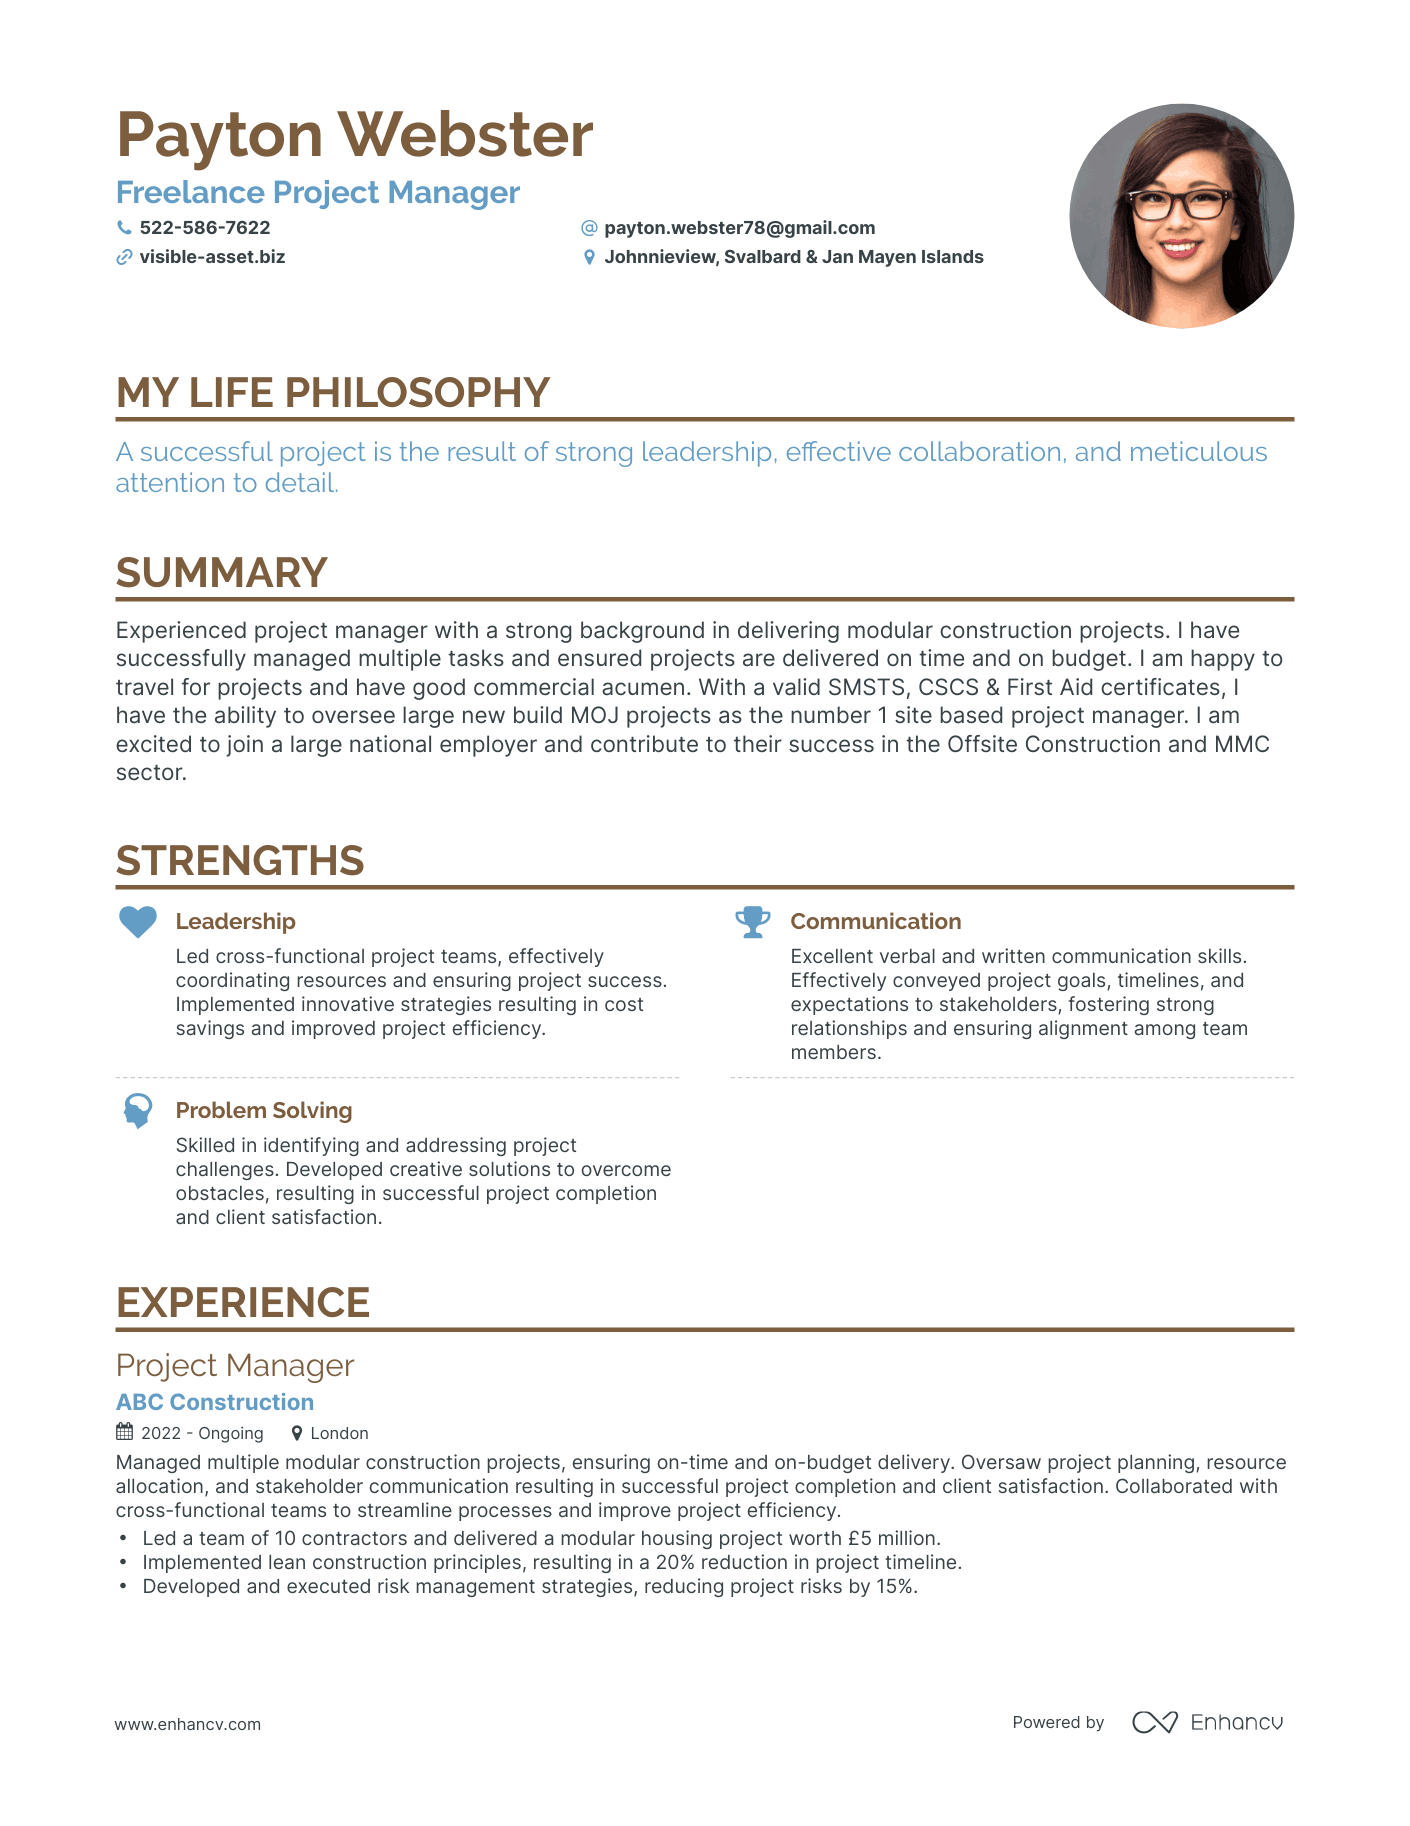 Creative Freelance Project Manager Resume Example